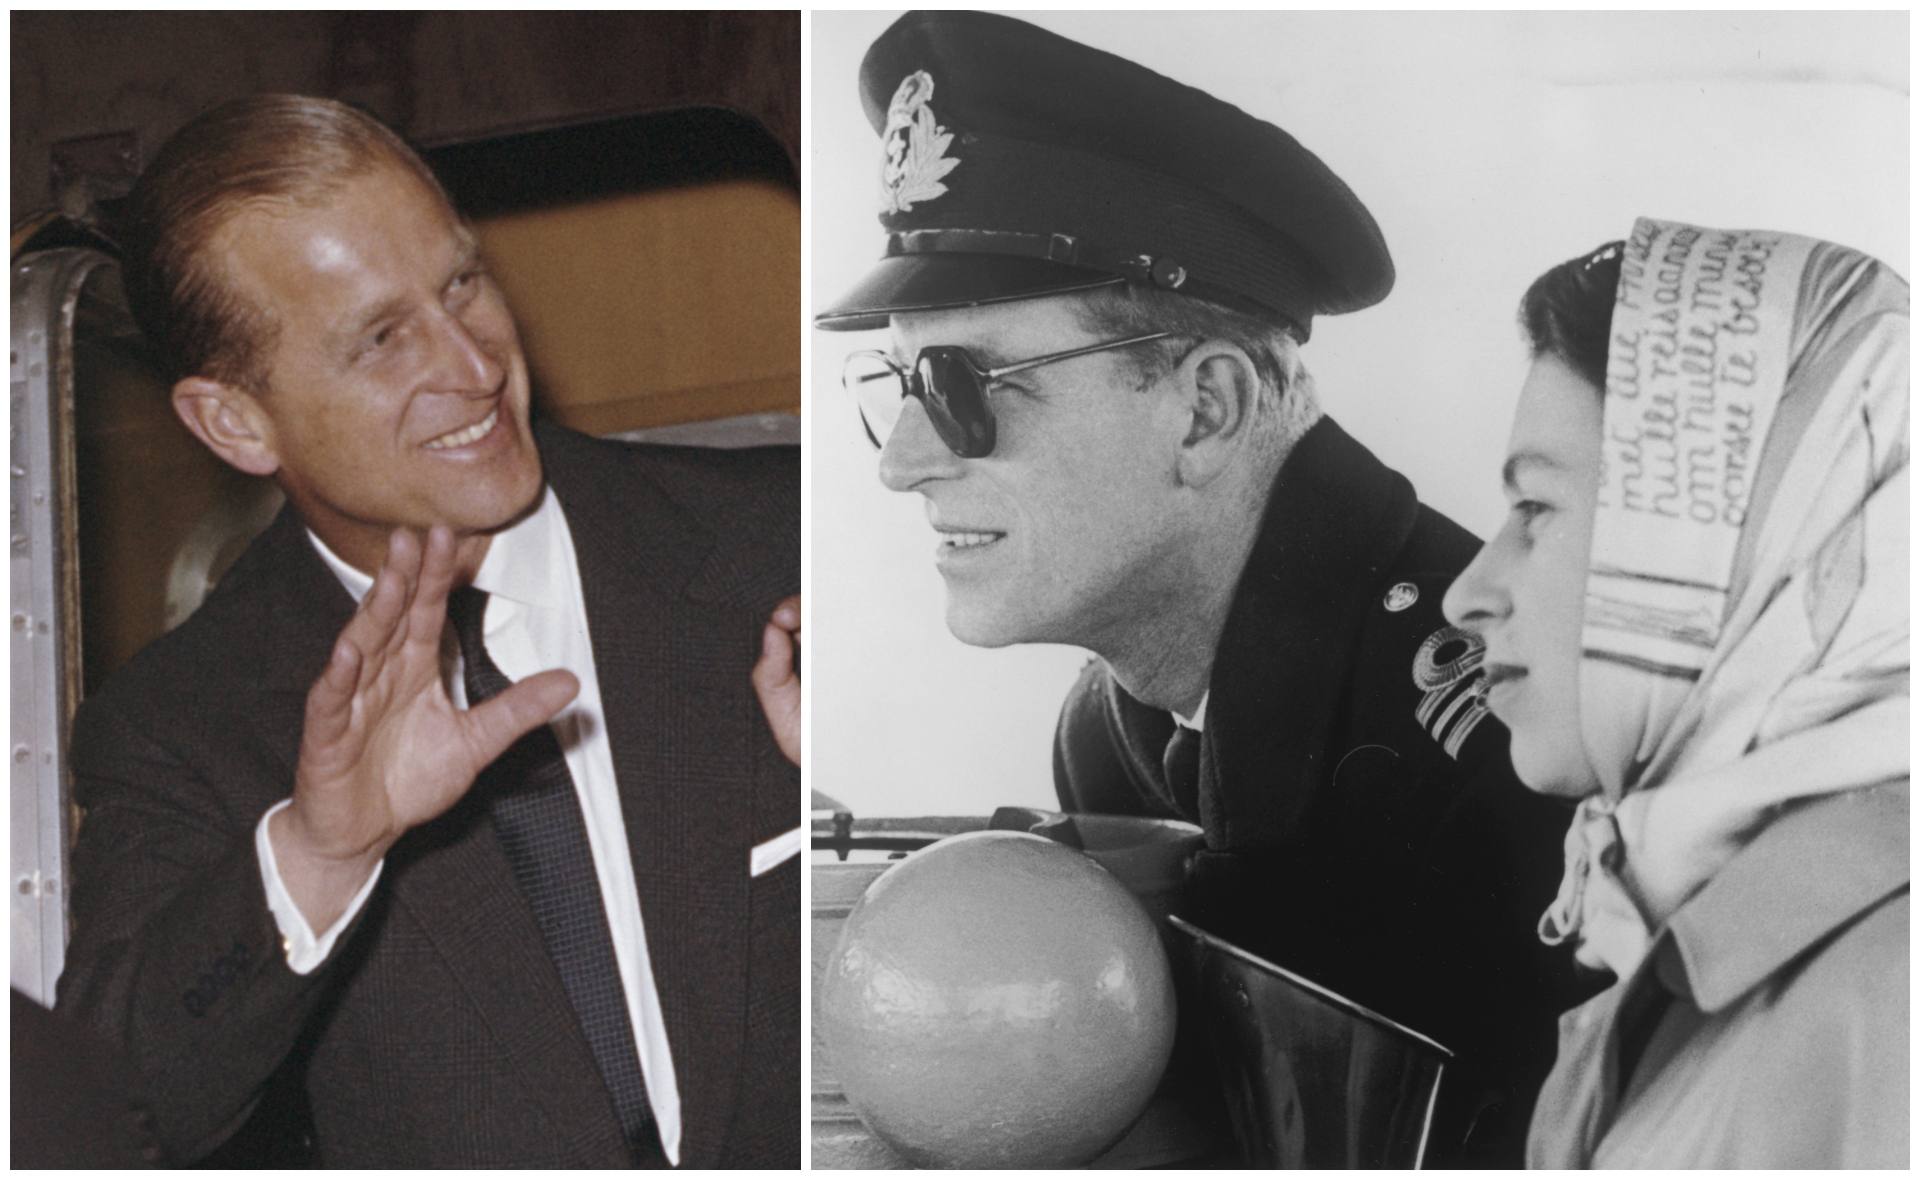 Before Sean Connery’s 1962 debut, Prince Philip could have been the first James Bond